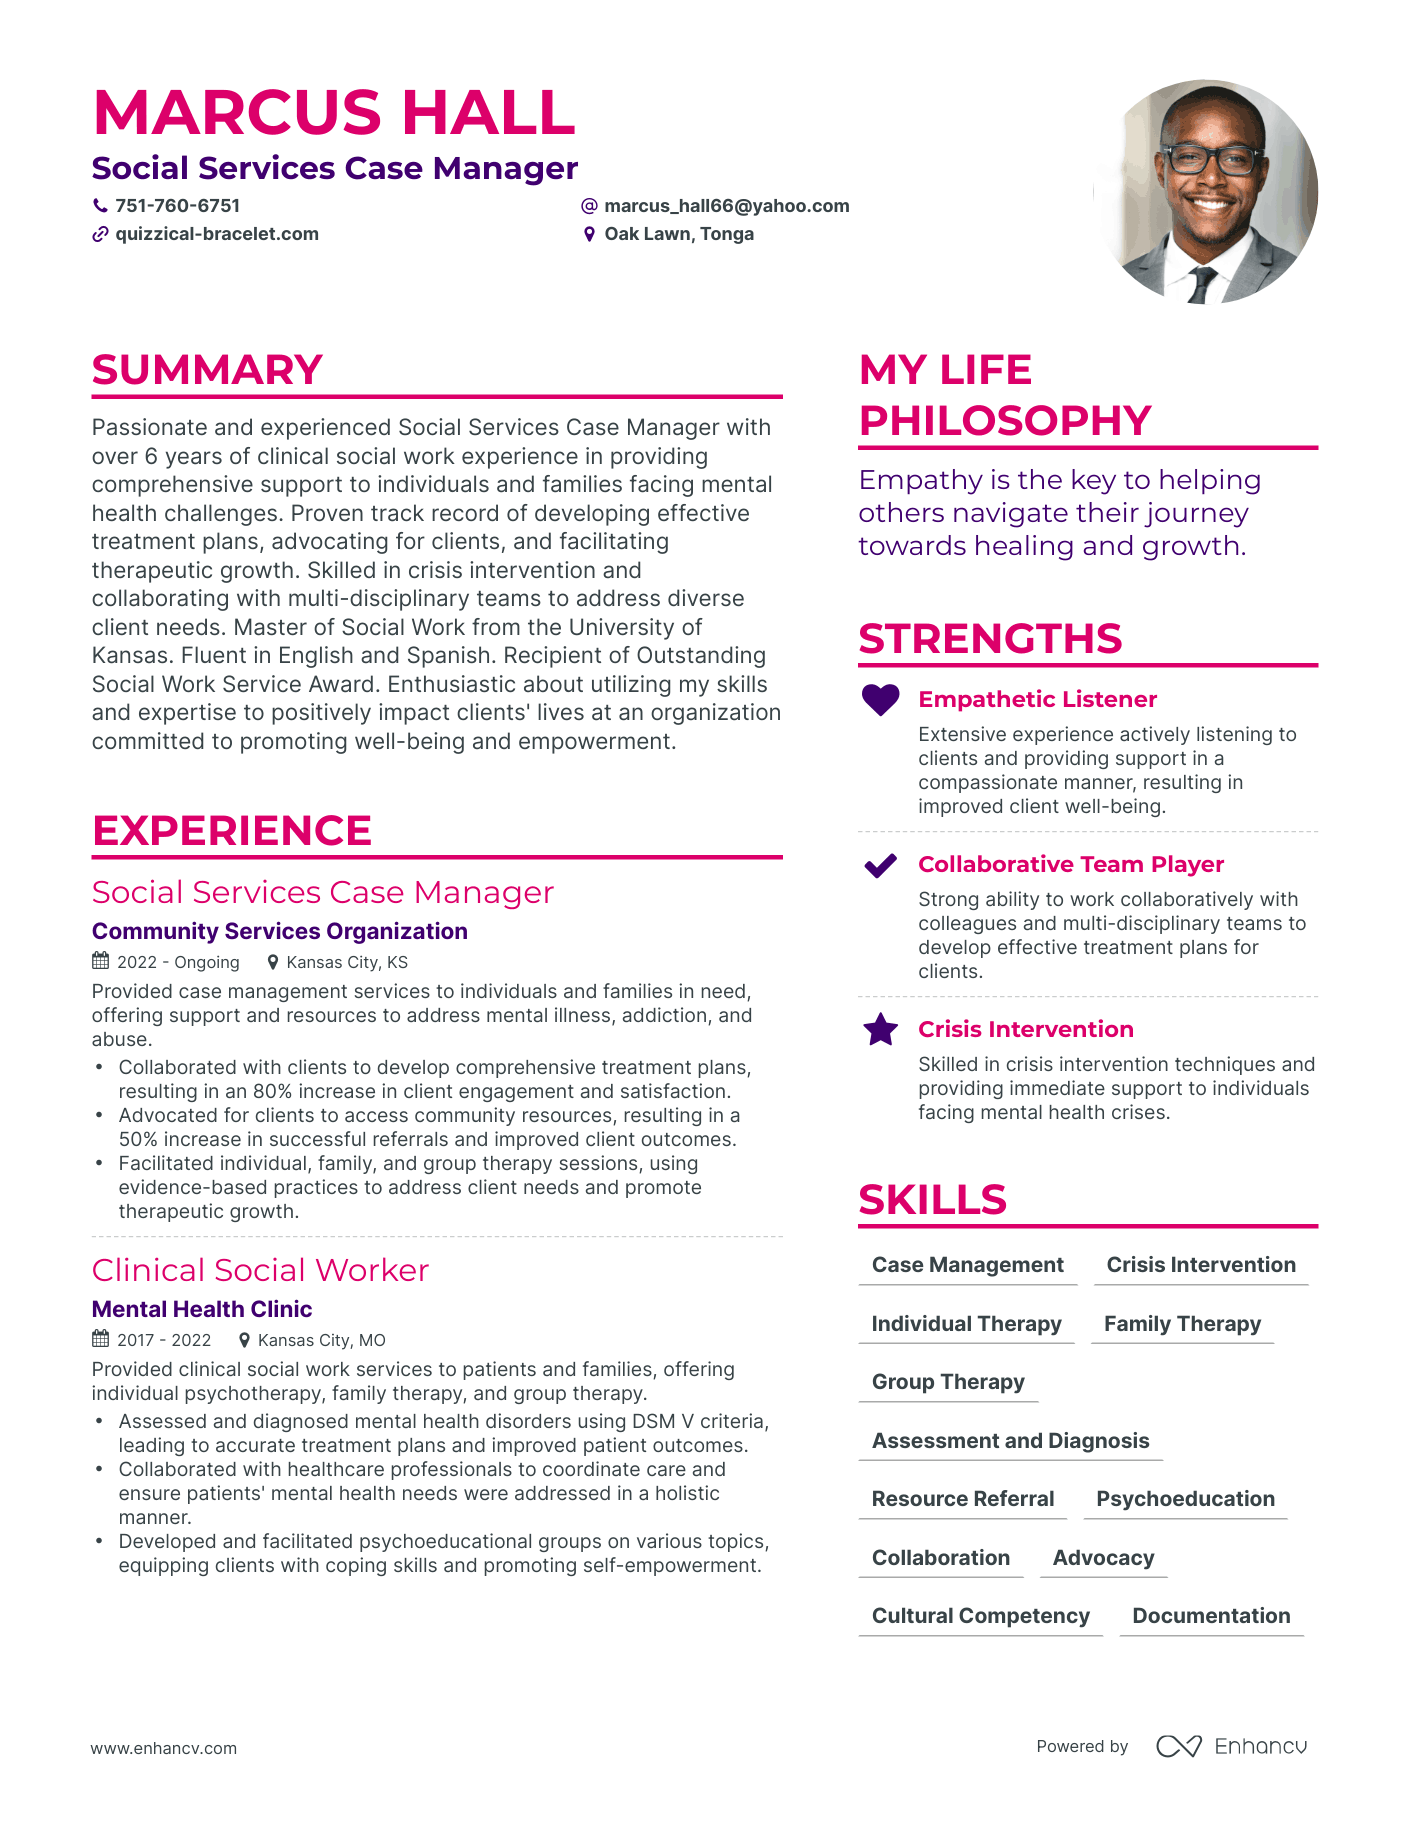 Social Services Case Manager resume example